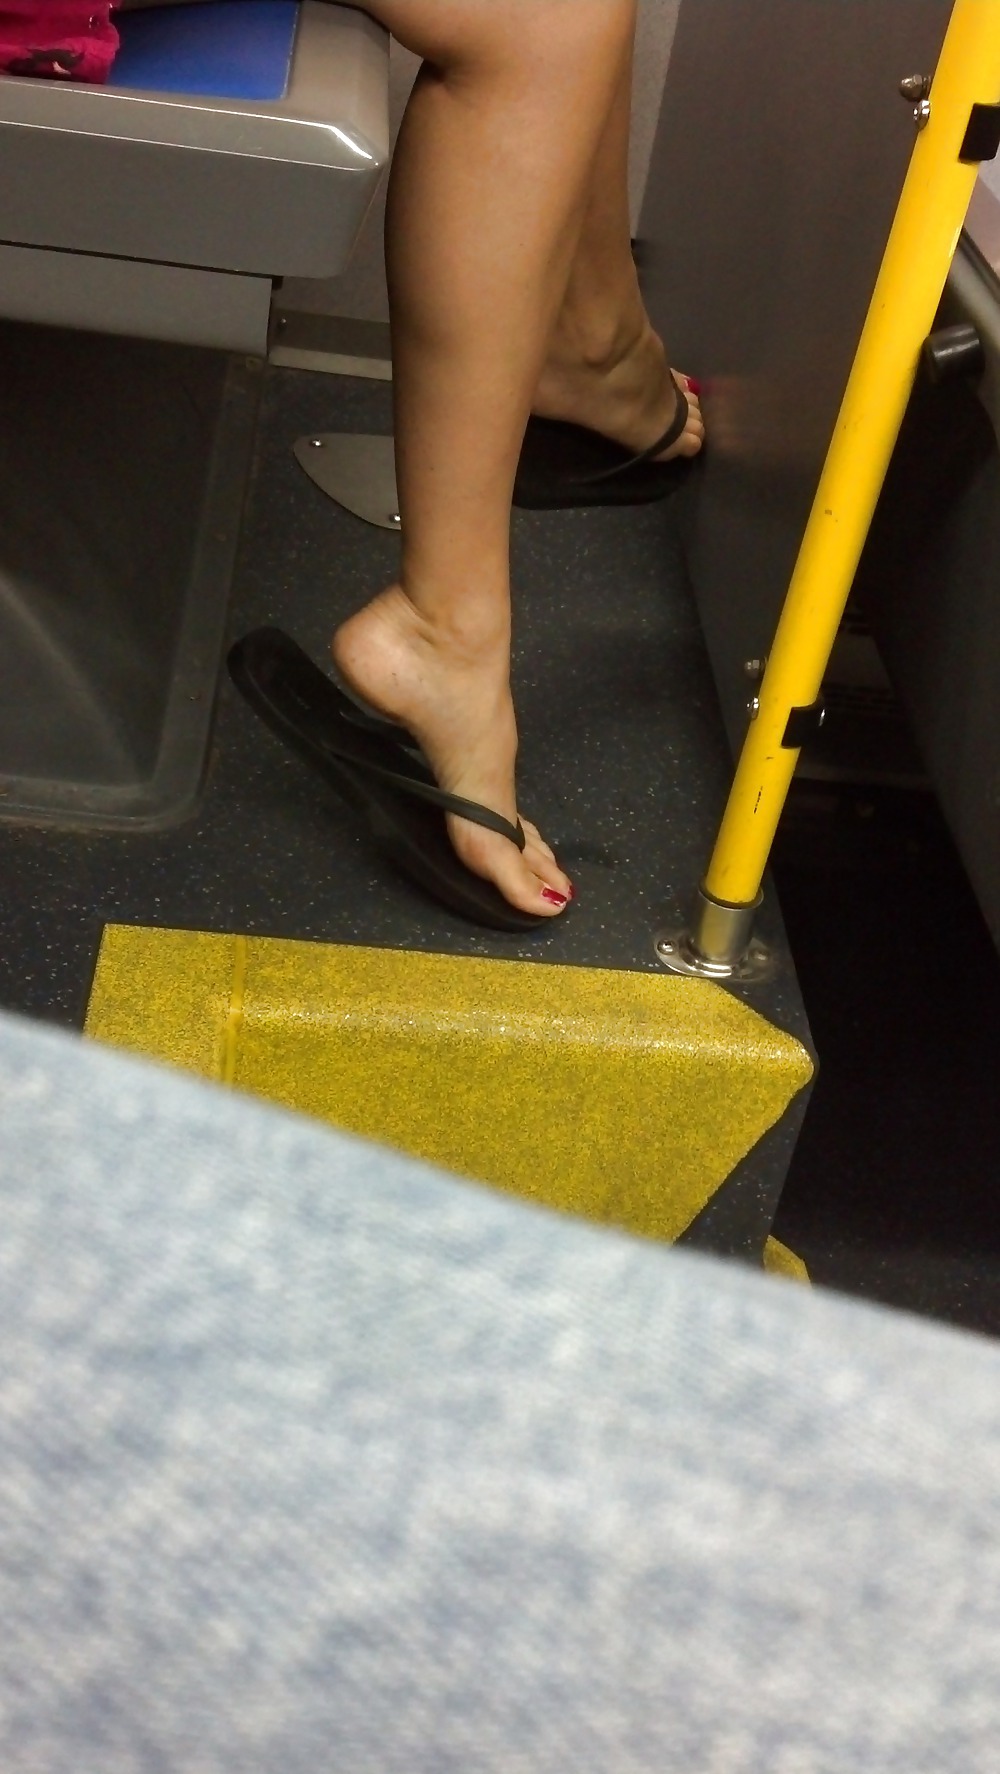 Women feet - one of the sexiest things #24544608